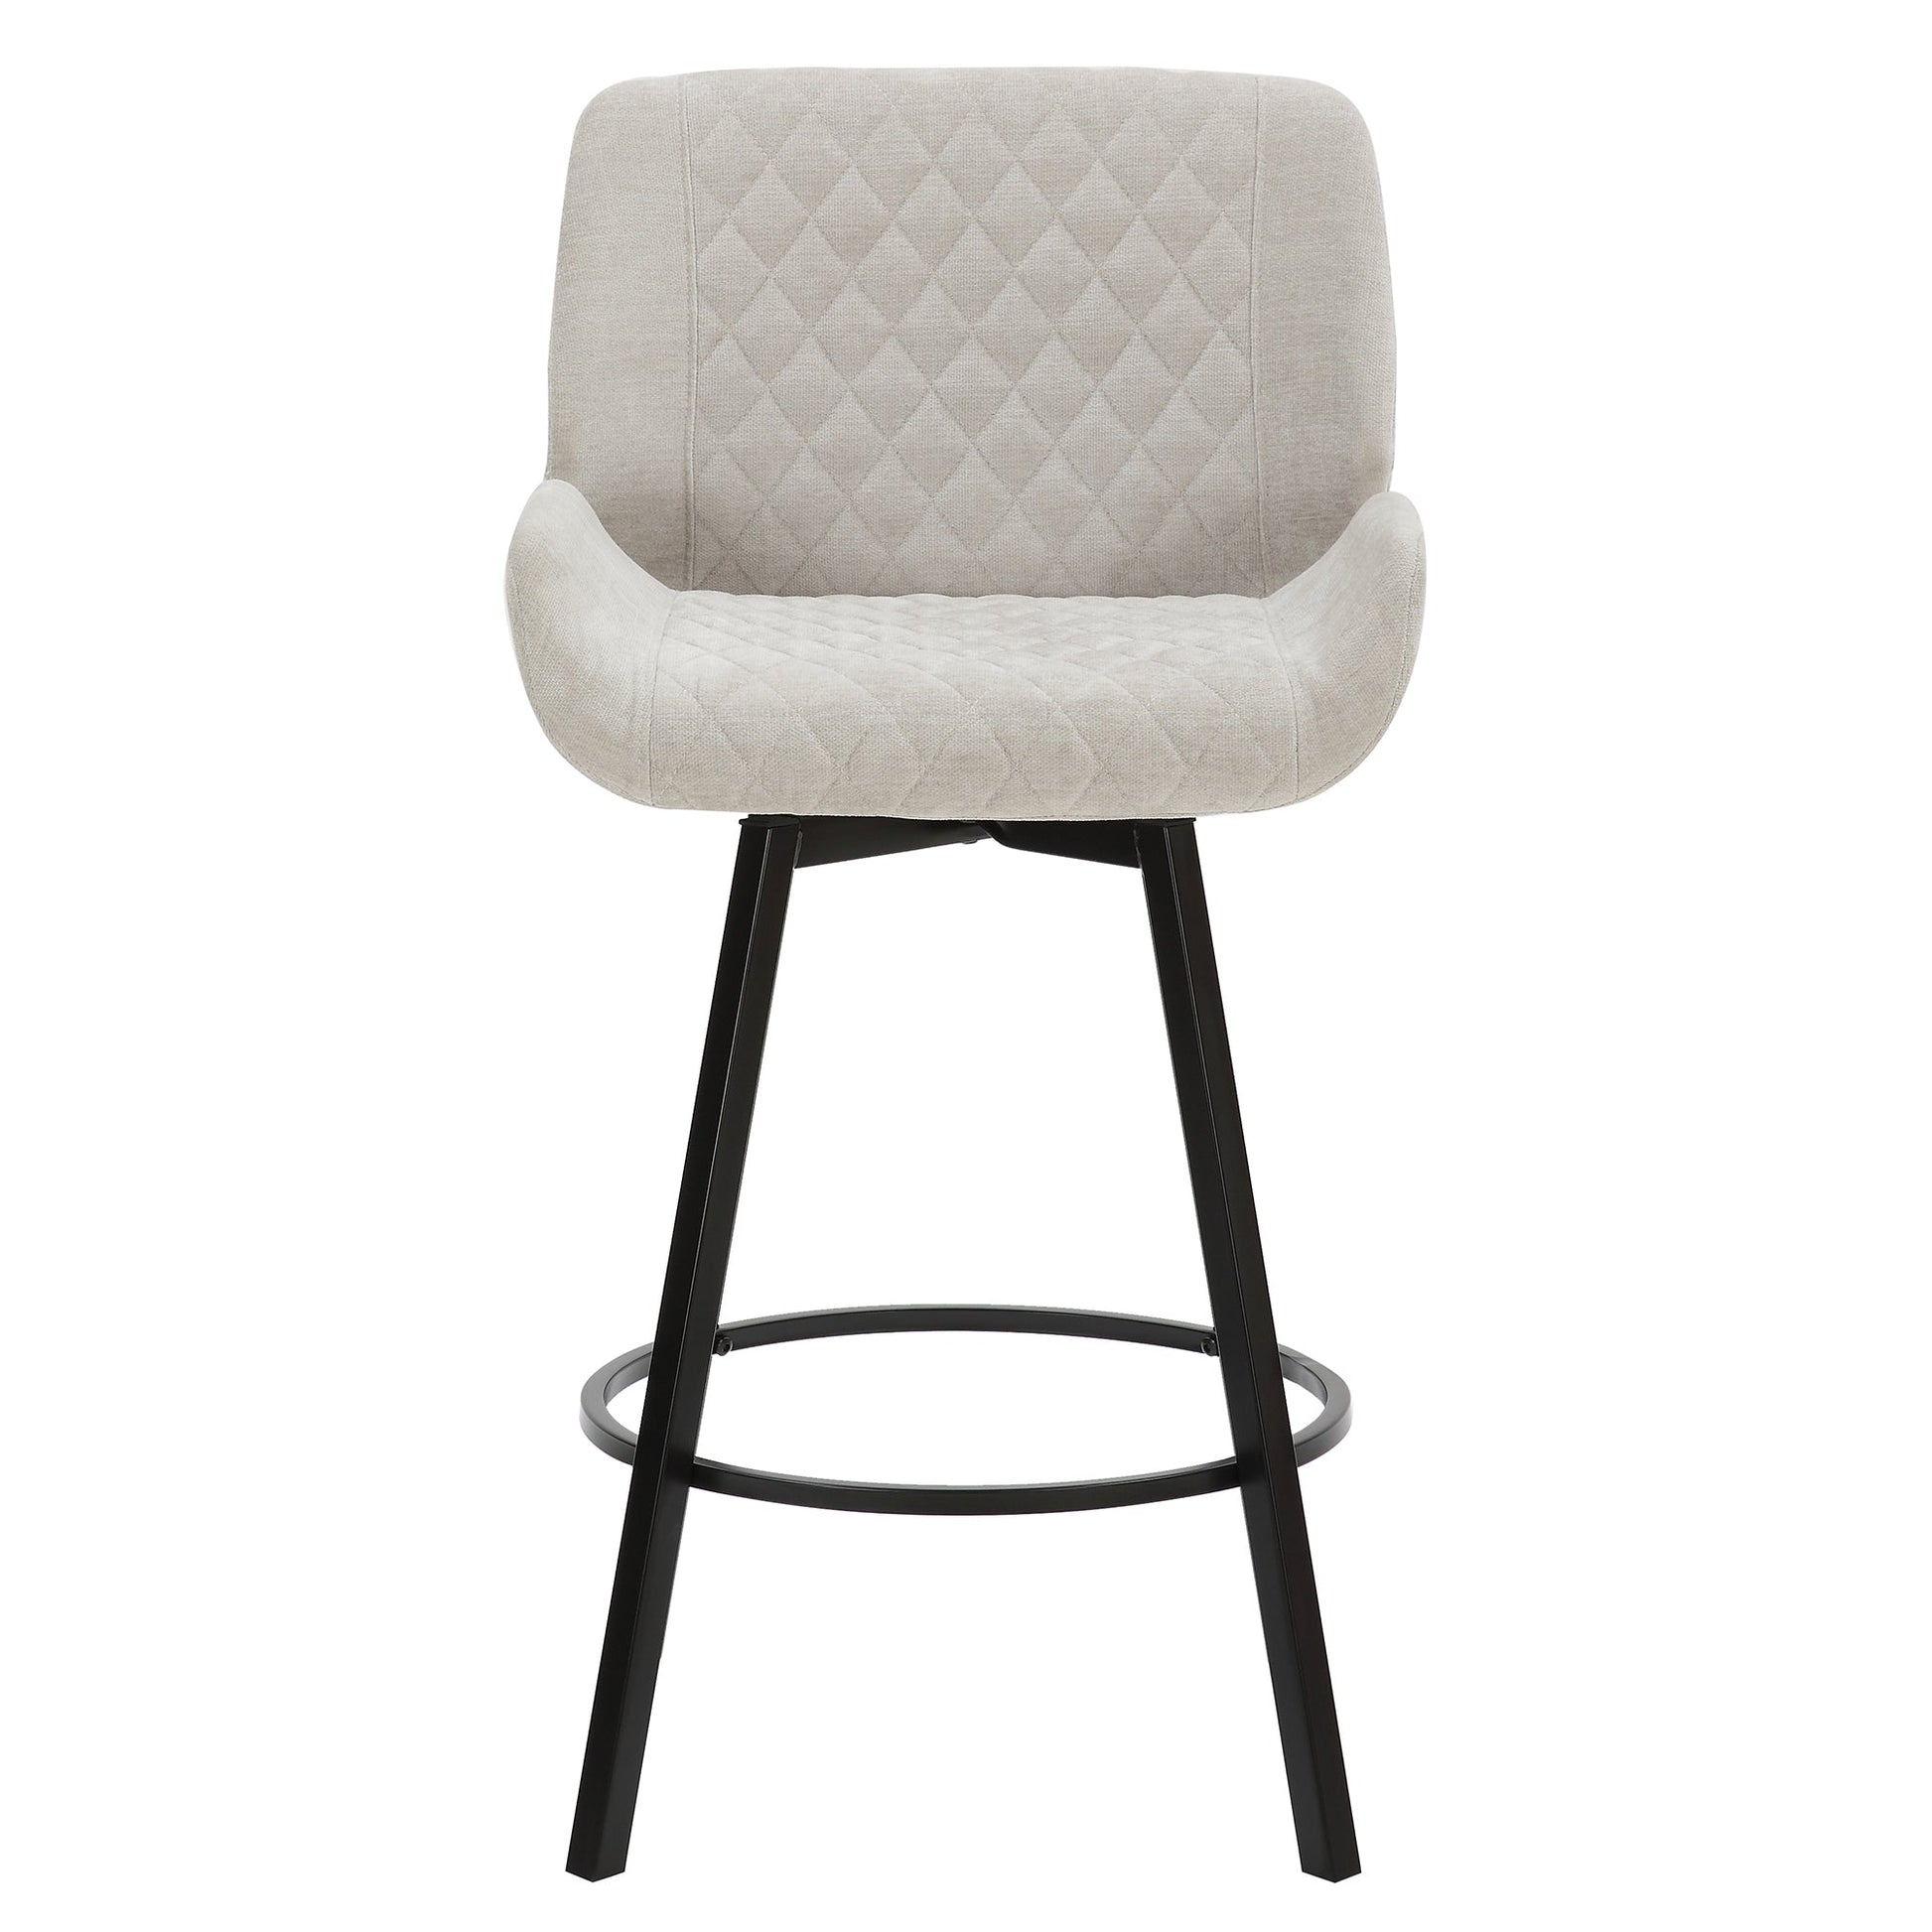 26 inch Bar Stools | Sets of 2 | Fraser Grey and Black - Your Bar Stools Canada